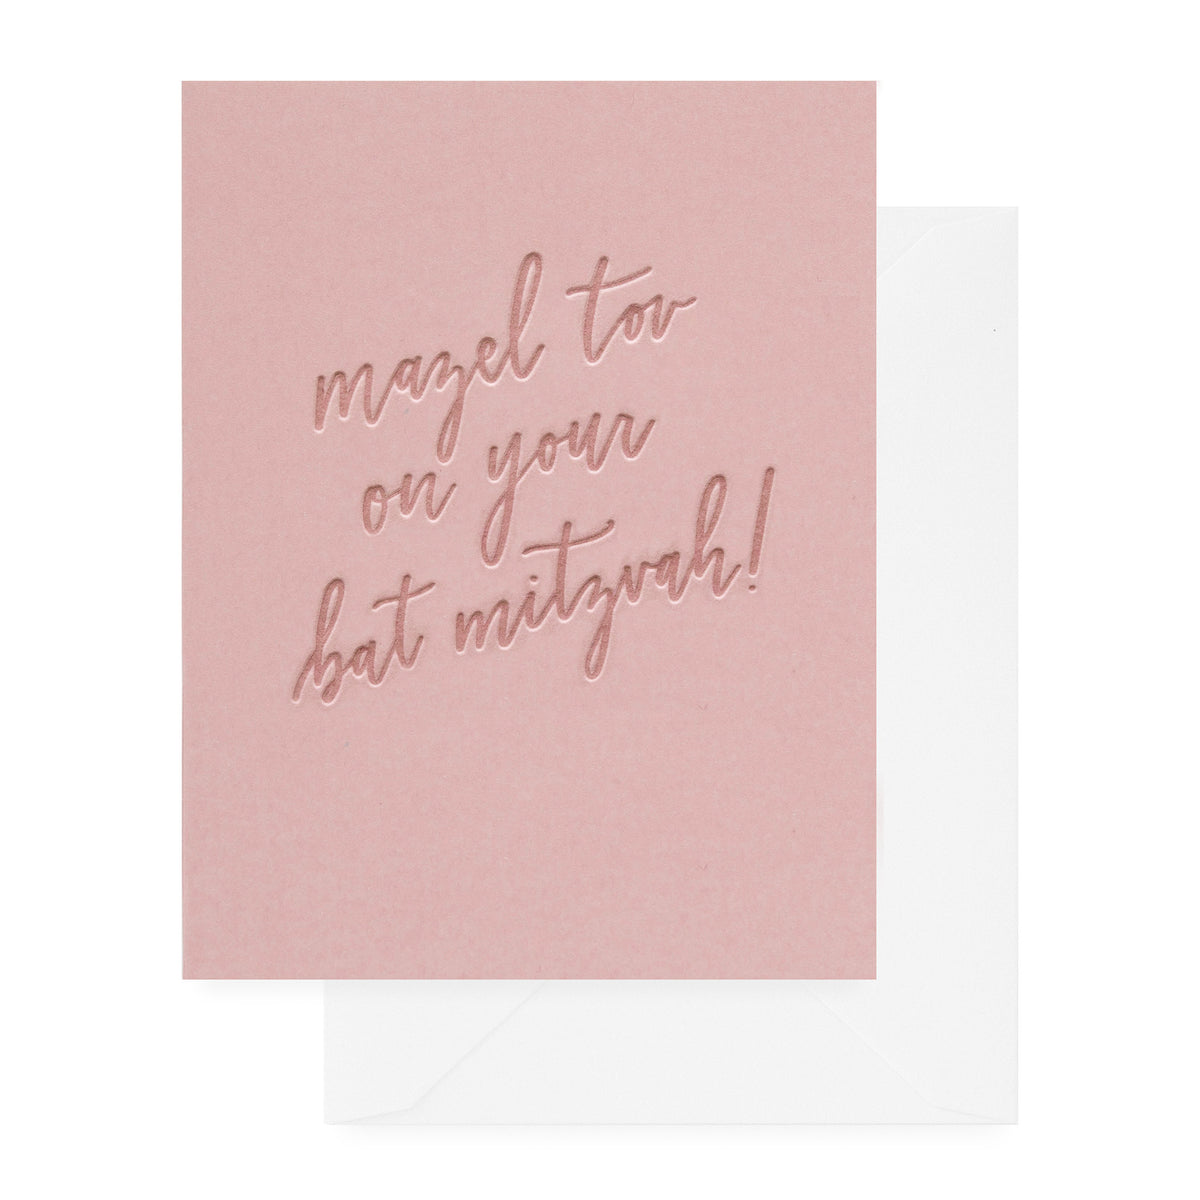 Mazel Tov on your Bat Mitzvah dusty rose card with a while envelope